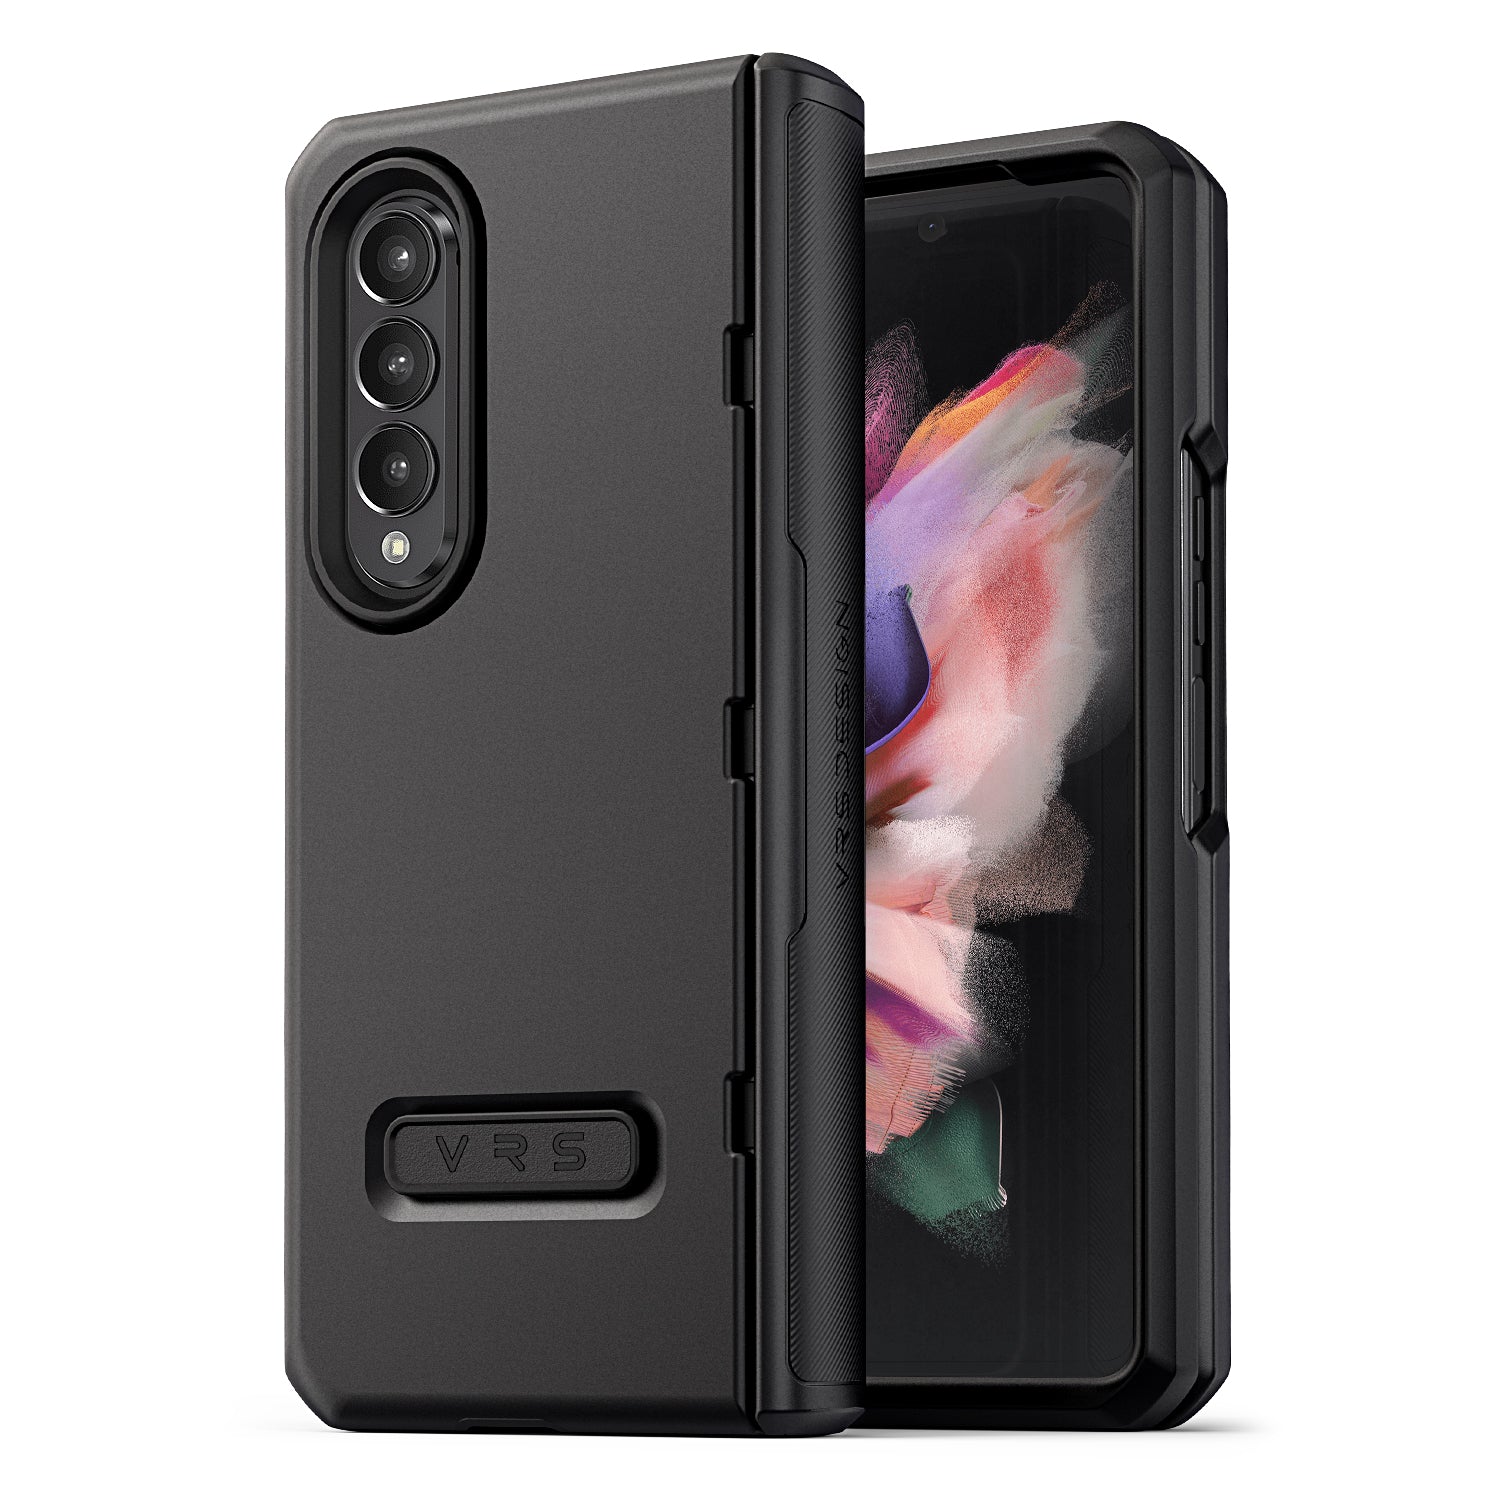 Samsung Galaxy Z Fold 3 wallet rugged case with multiple durable and convenient card slot with sleek minimalism by VRS